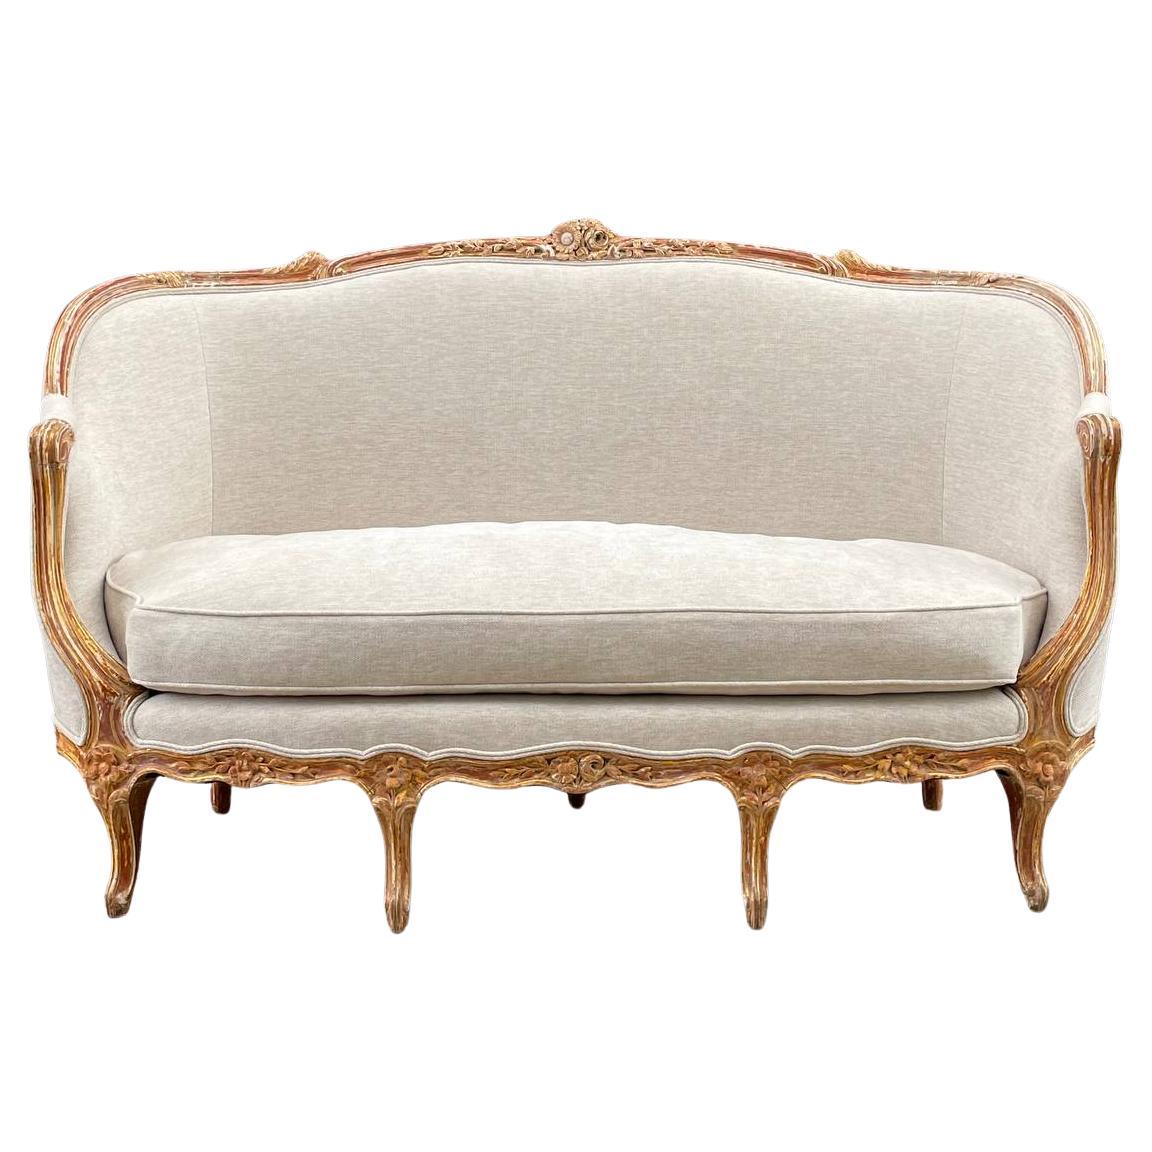 Antique French Louis XVI Sofa with Carved Details For Sale